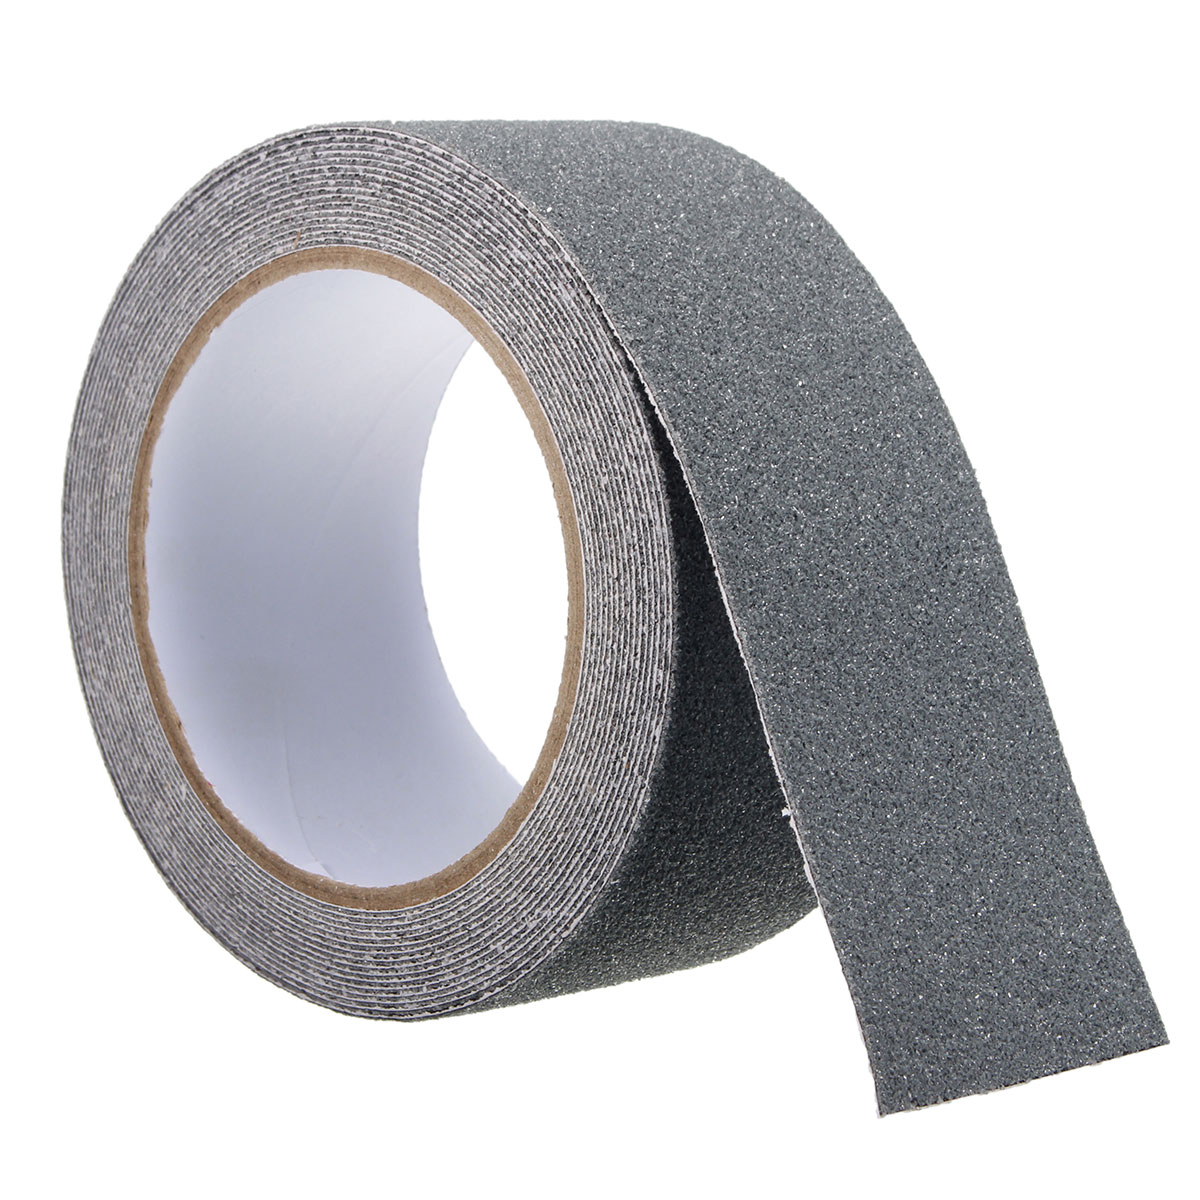 5CM-x-5M-Non-Slip-In-The-Dark-Tape-Anti-Slip-Adhesive-Grip-for-Stairs-and-Gaffers-165-Feet-Long-1382967-9